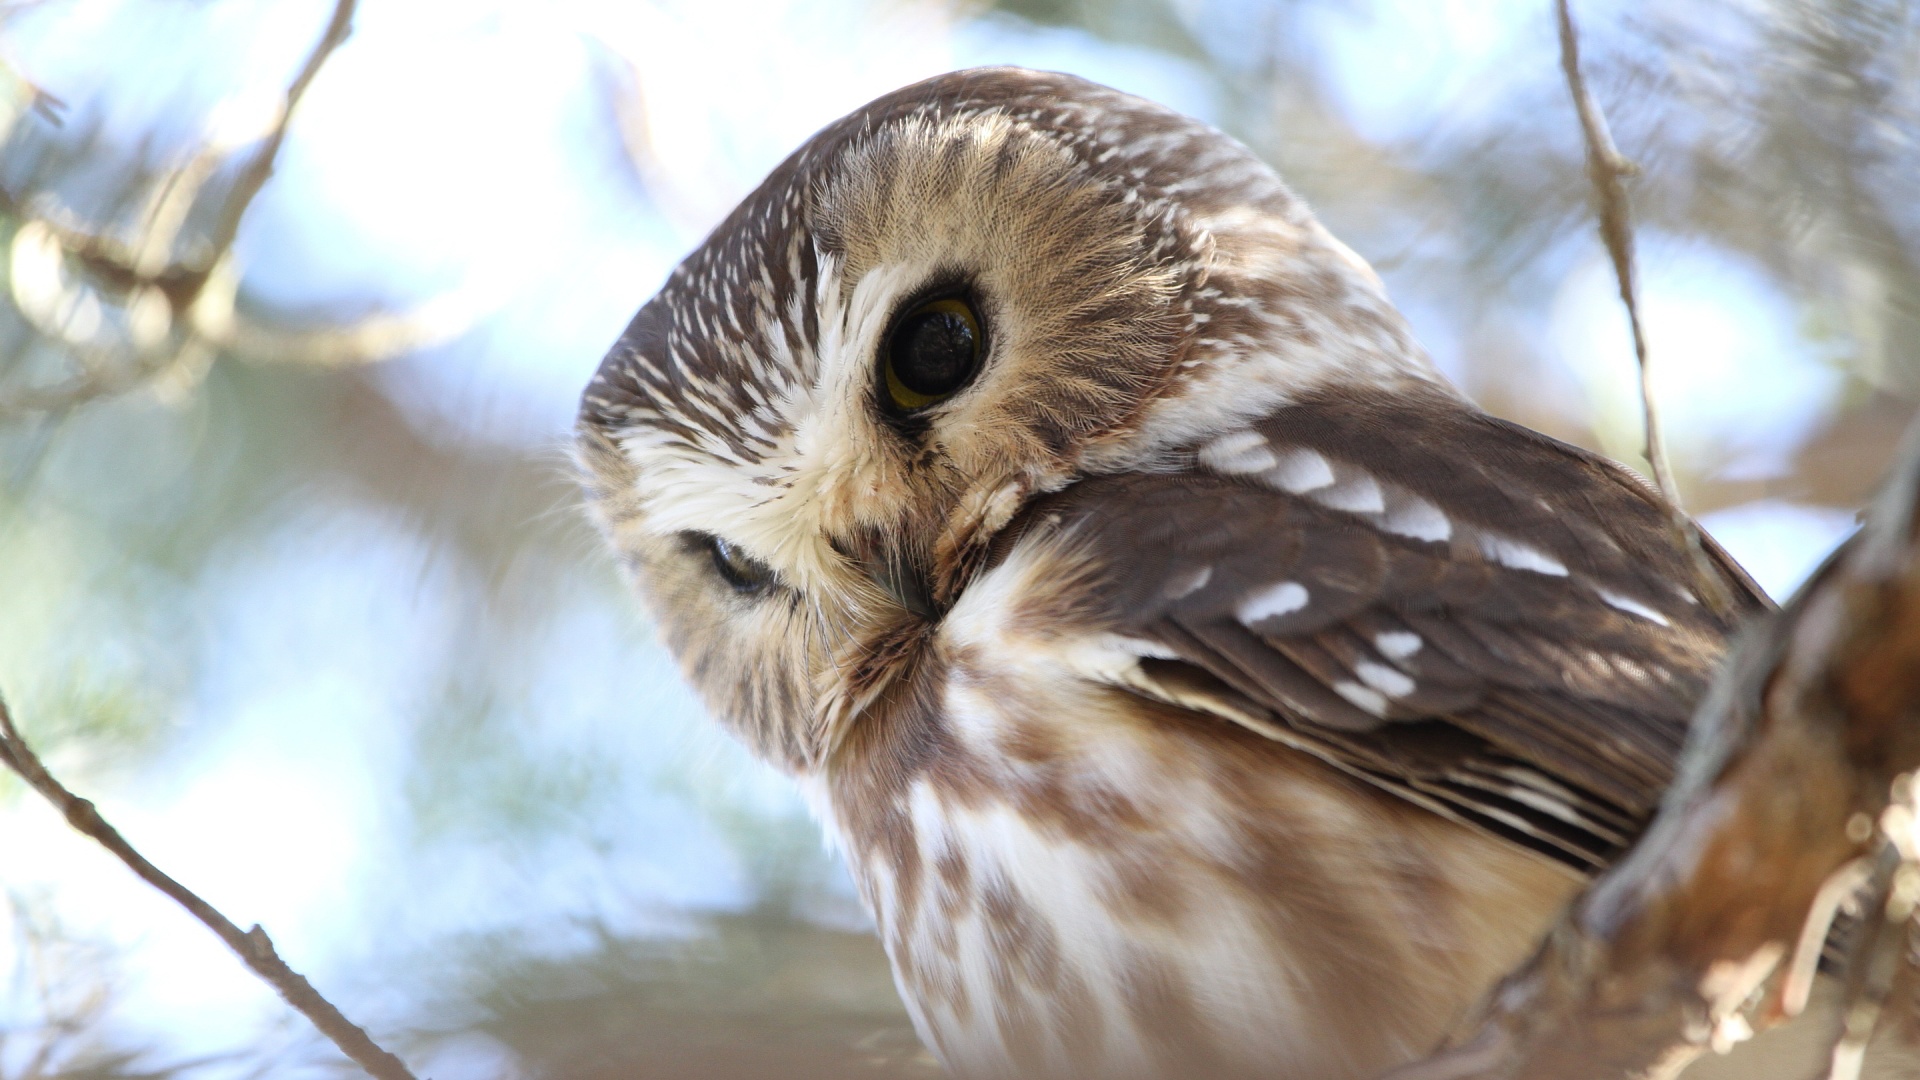 Cute Owl Picture Free Download.